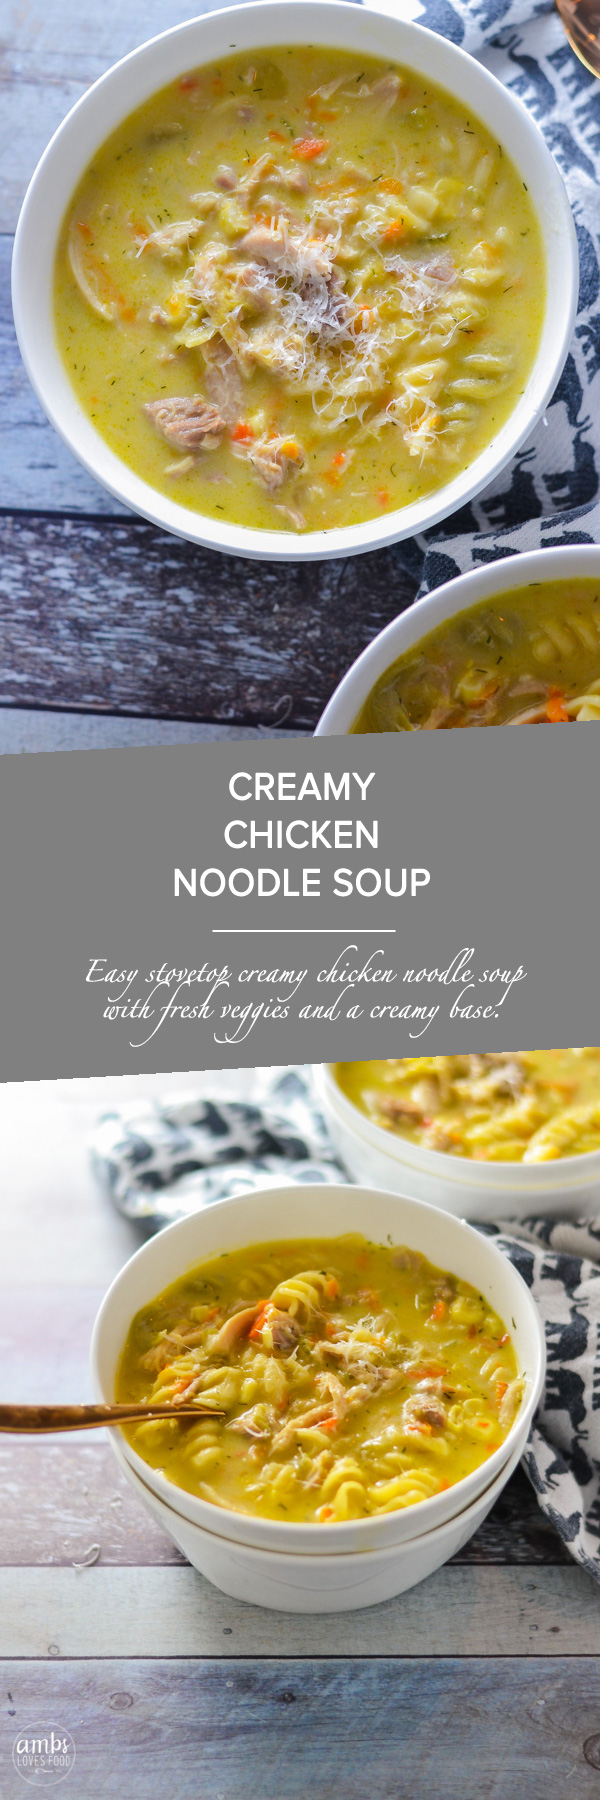 CREAMY CHICKEN NOODLE SOUP – AMBS LOVES FOOD